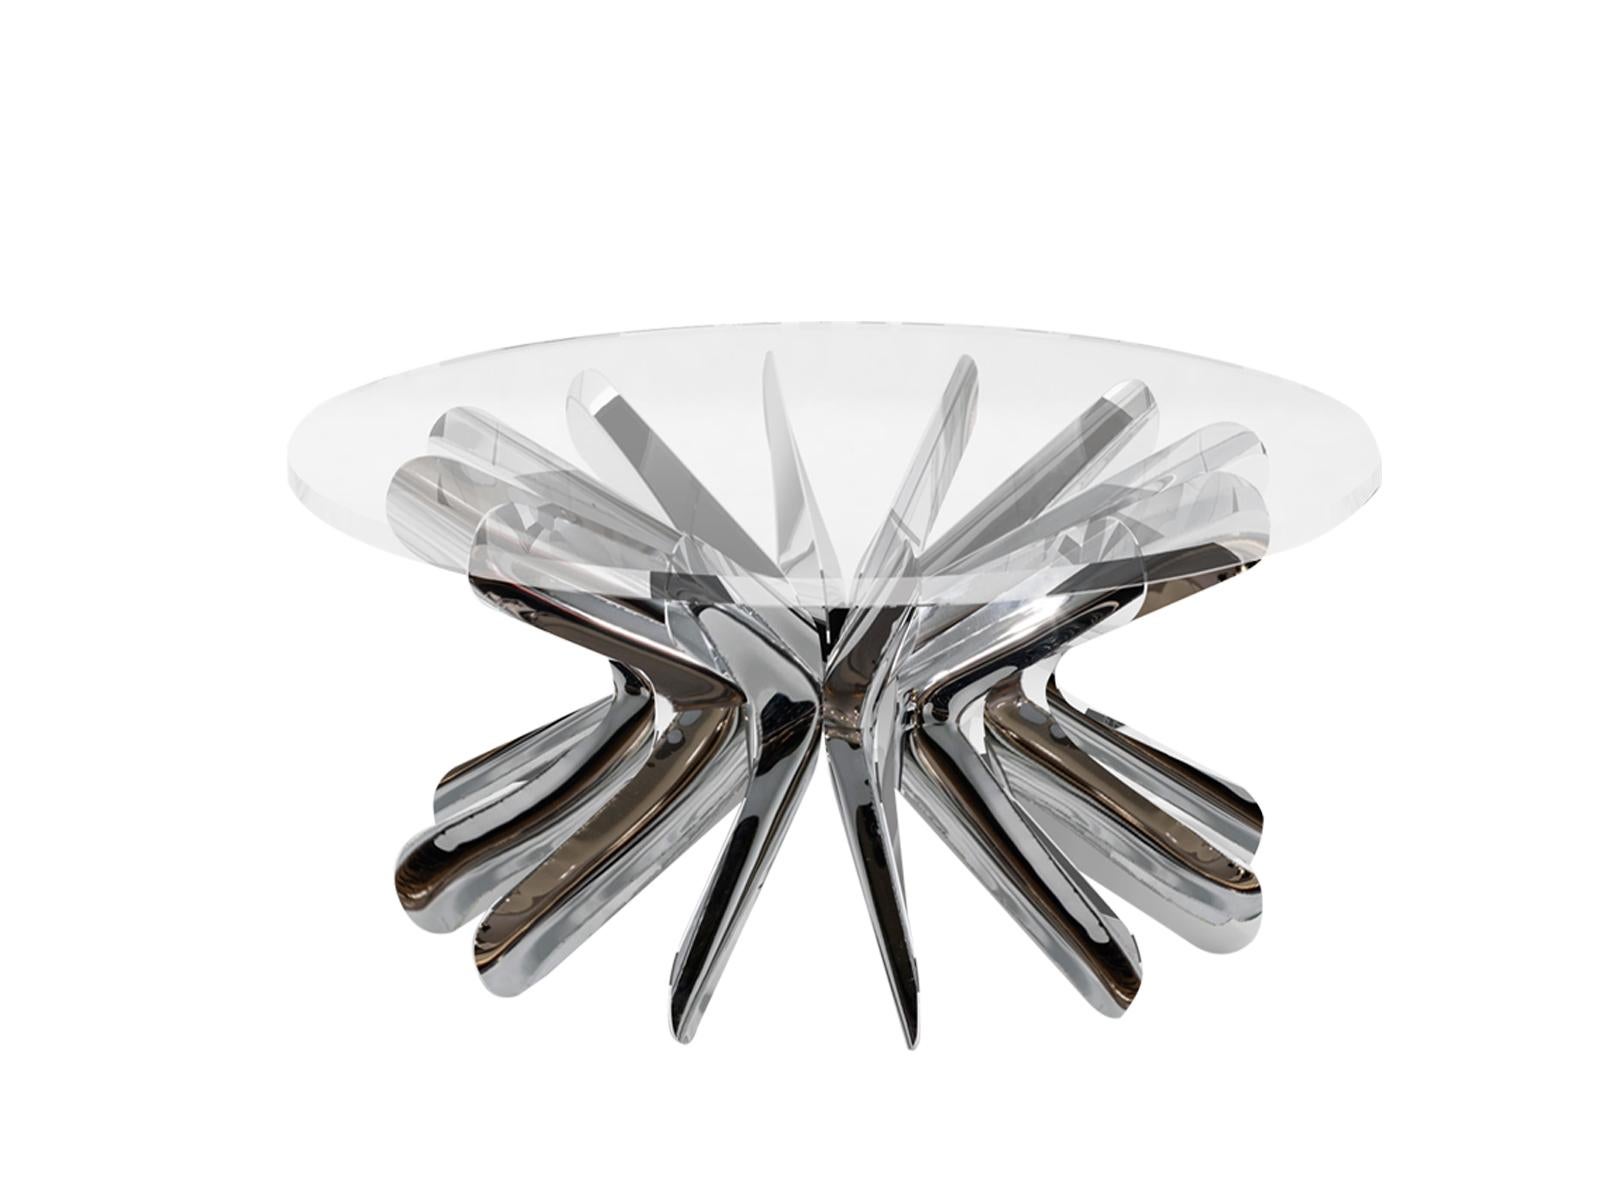 Polish Contemporary Round Dining Table 'Steel in Rotation No. 1' by Zieta, White Matt For Sale